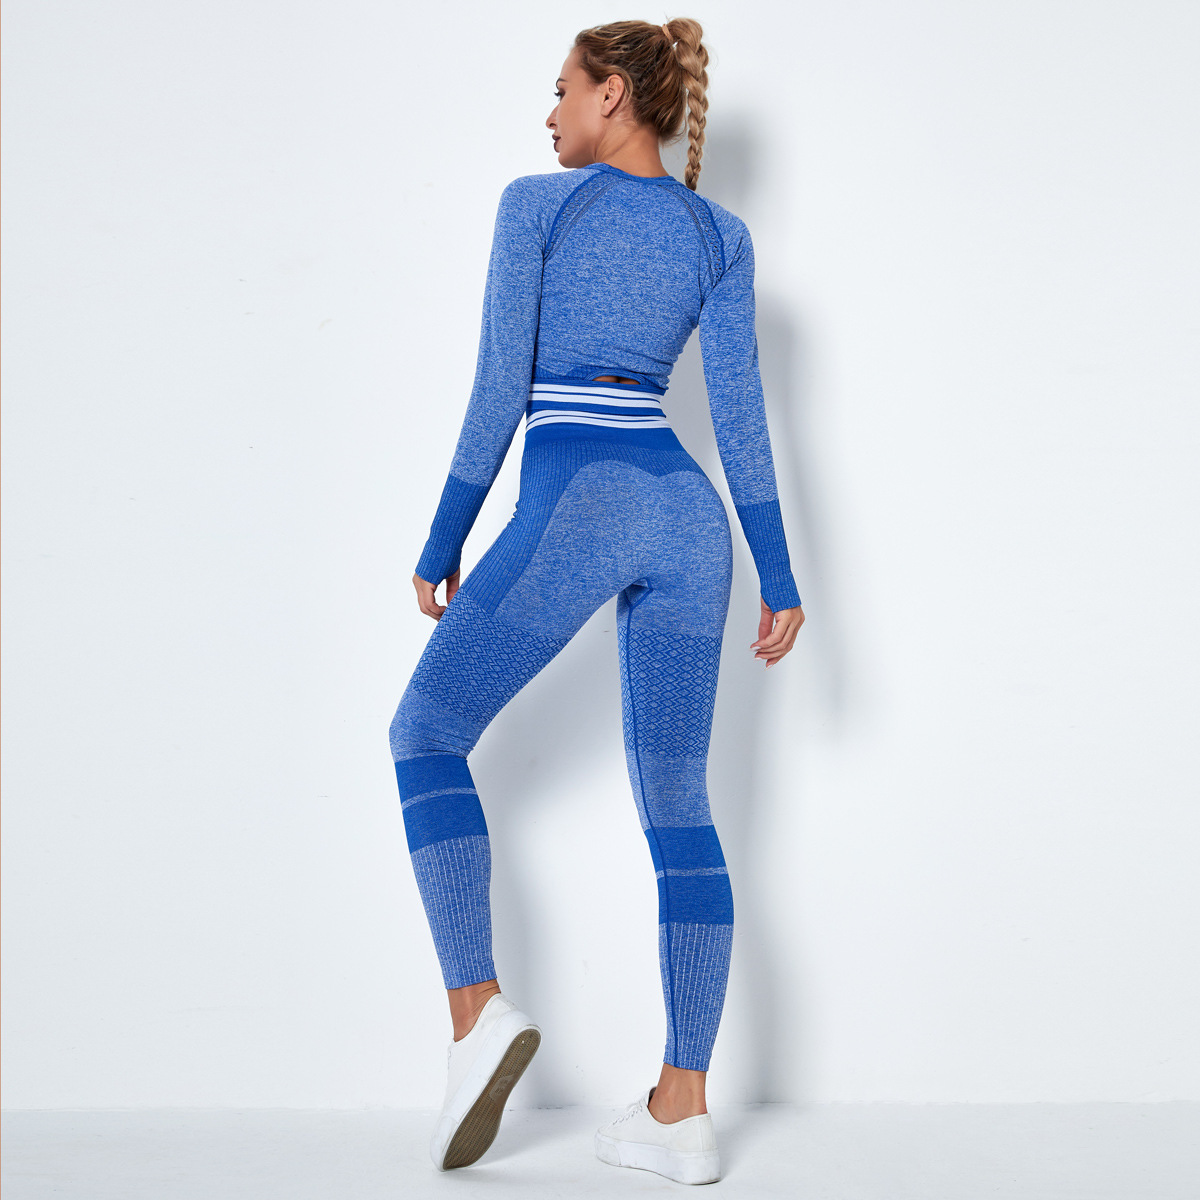 4 Color 2 Piece Sport Suit Set Woman Training Wear Seamless Knitted Sport Bra Legging Fitness Trousers Women's Yoga Tracksuit